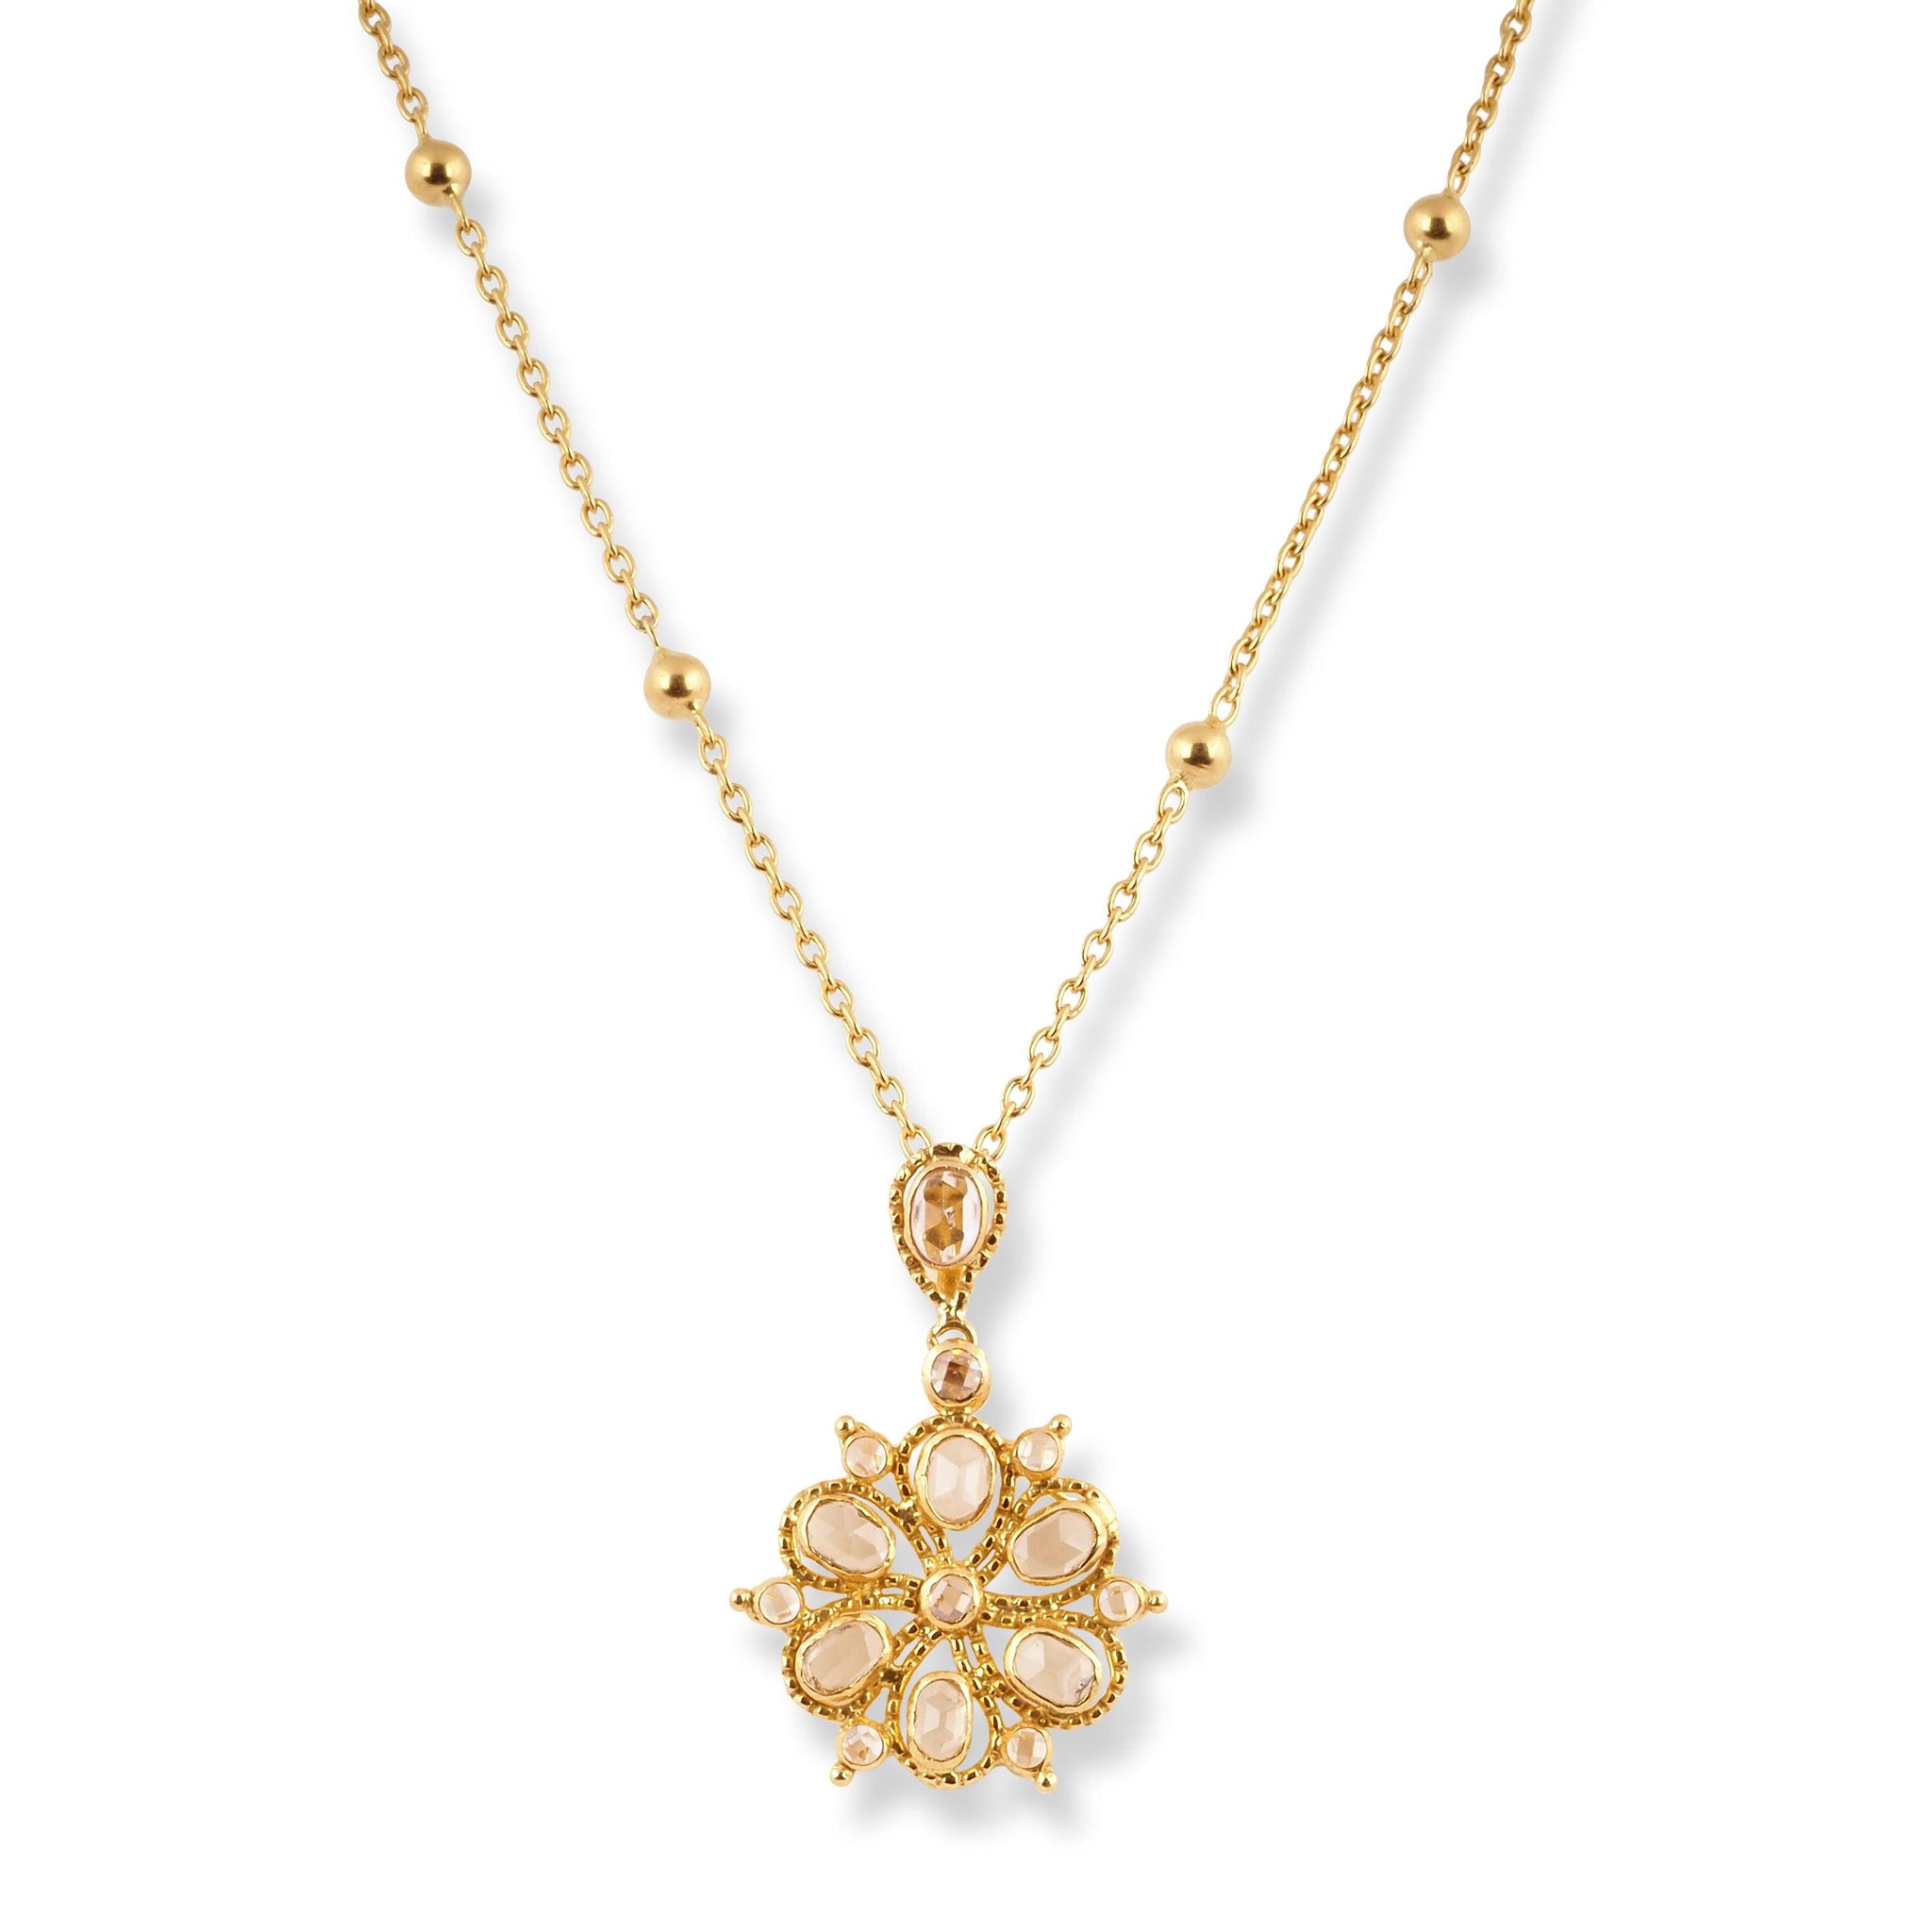 22ct Yellow Gold Necklace & Earrings with Polki Style Cubic Zirconia Stones.